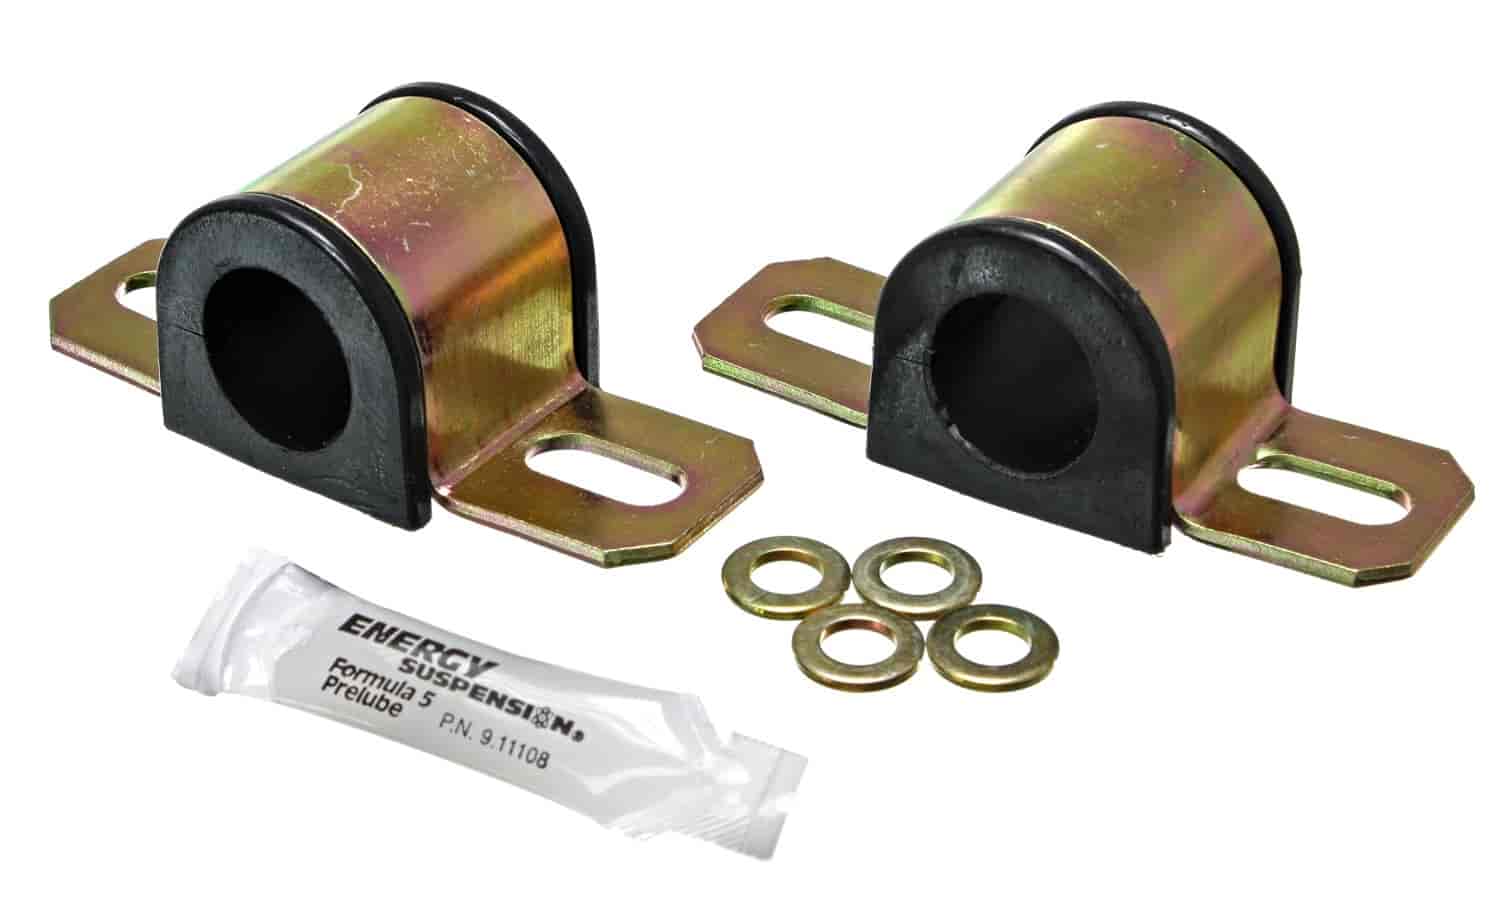 Universal Non-Greaseable Sway Bar Bushings 1" or 25mm